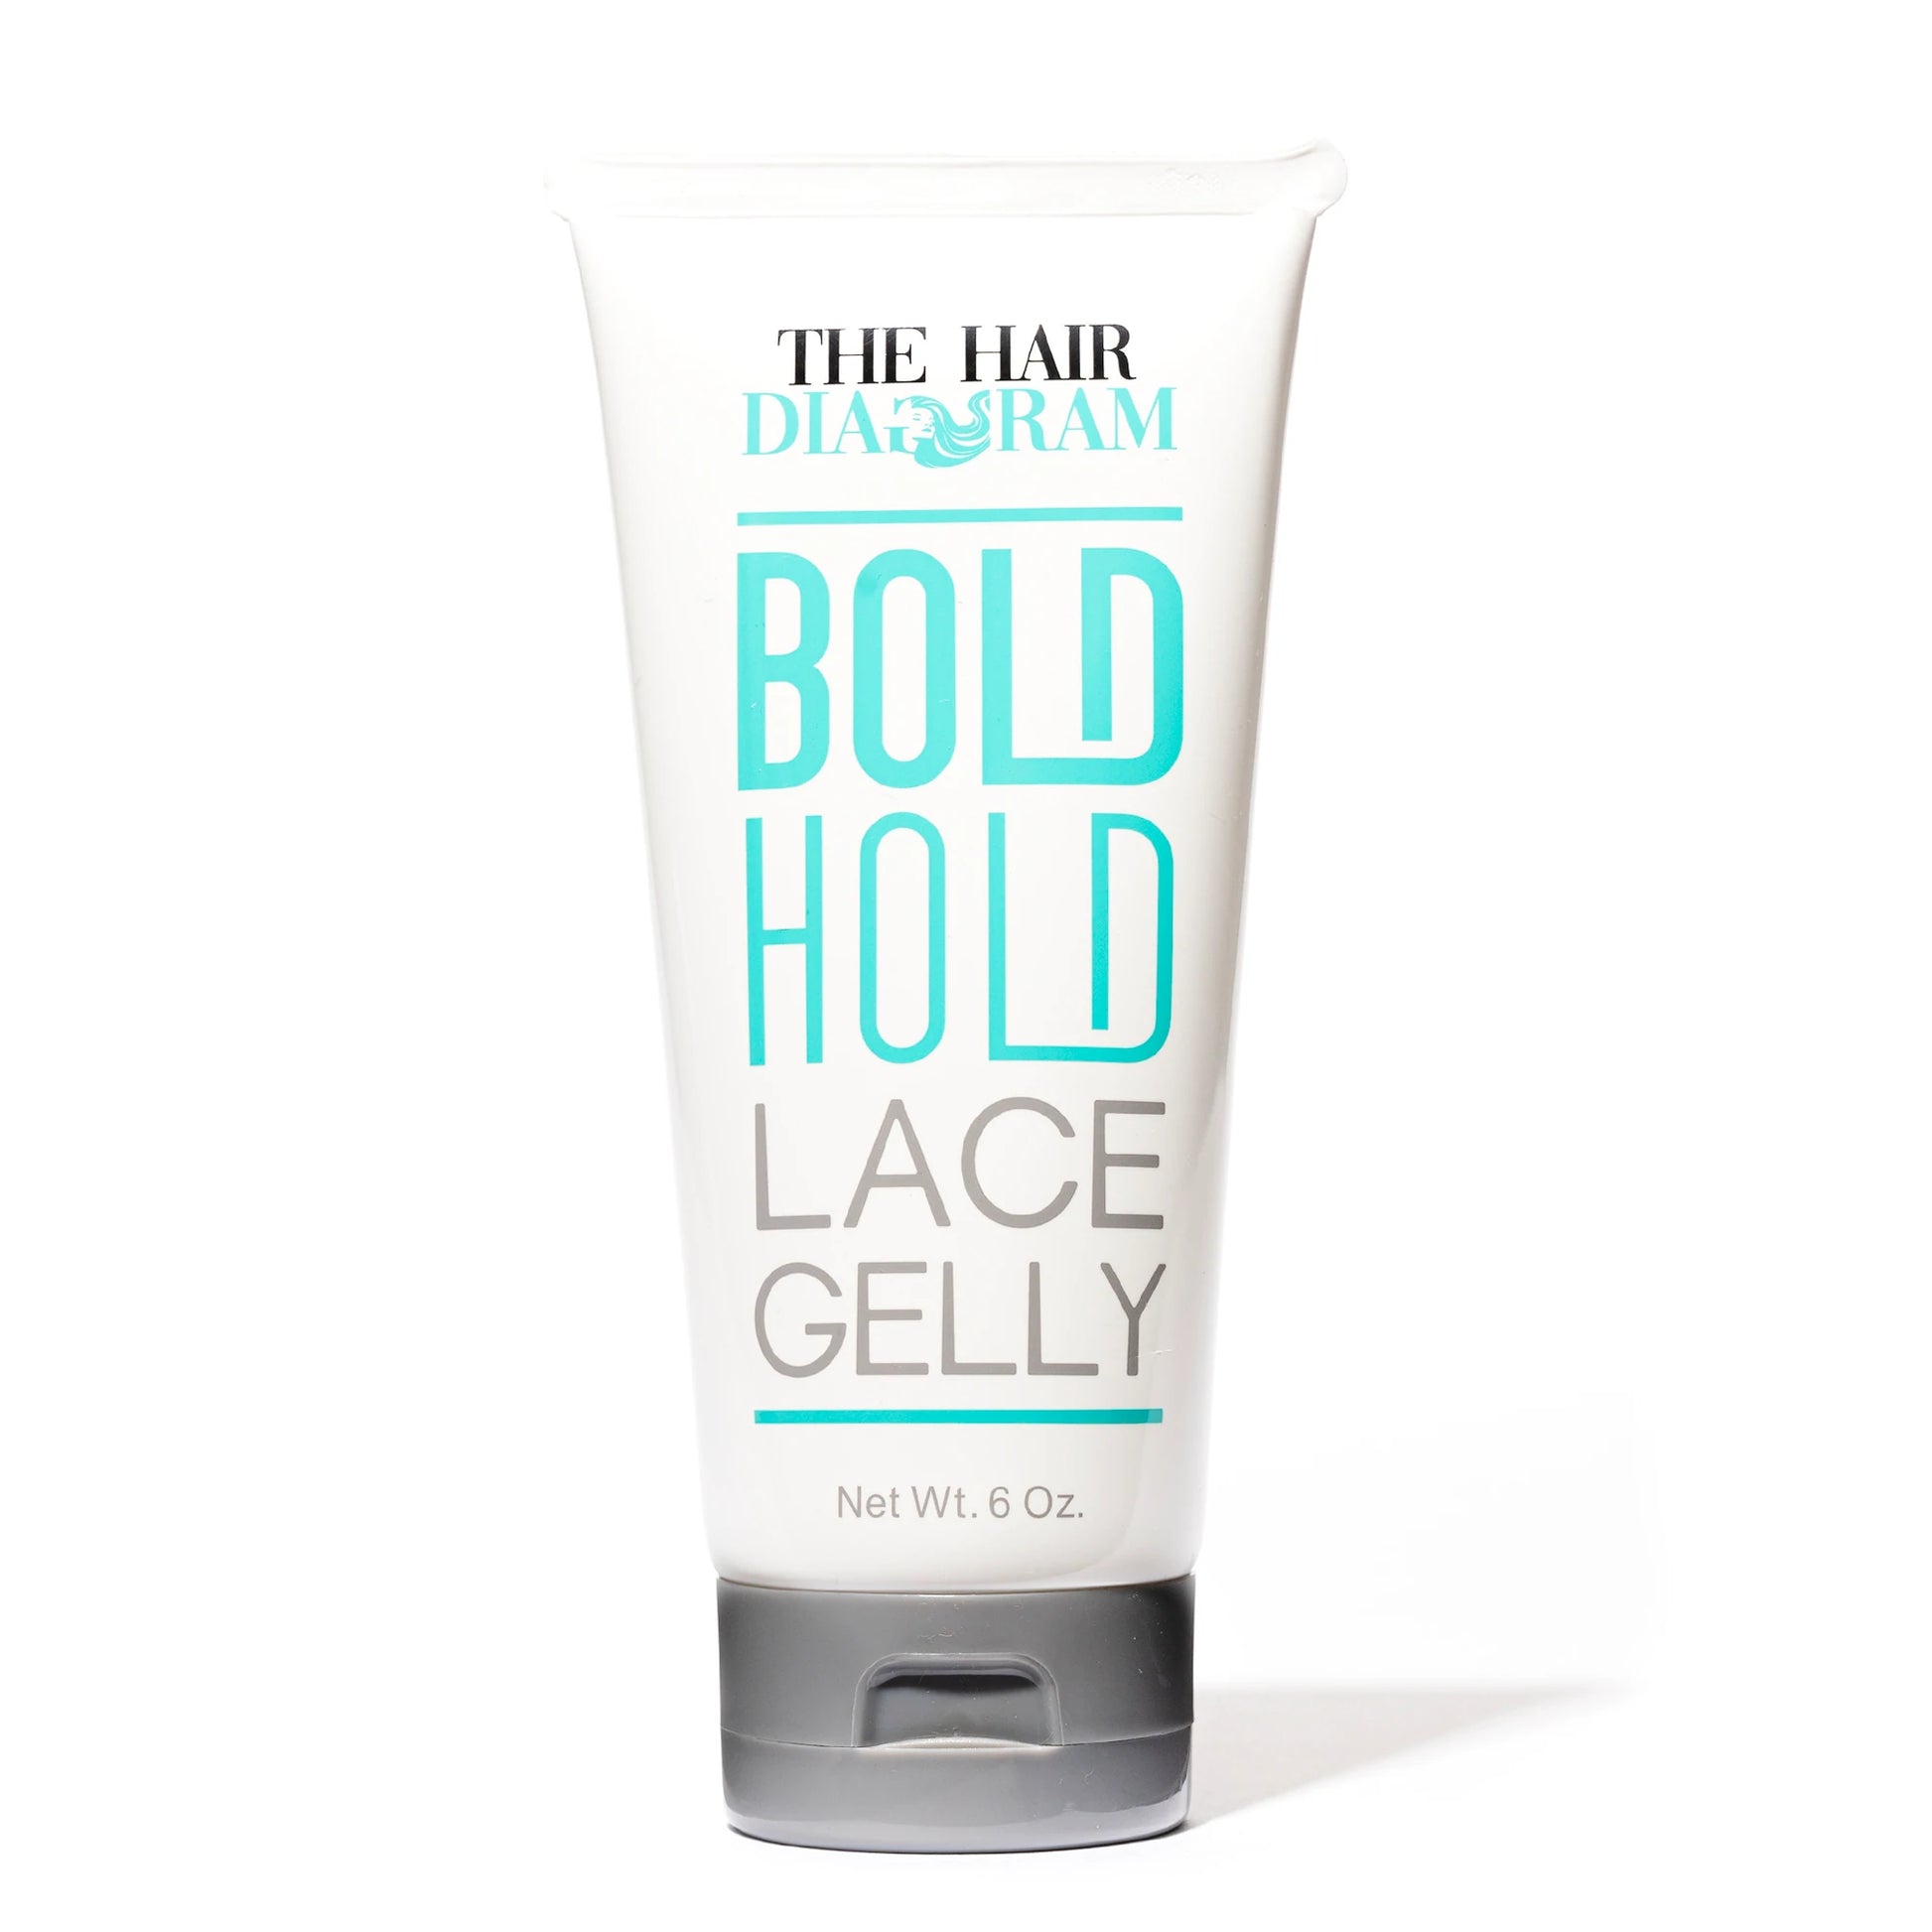 BOLD HOLD LACE GELLY